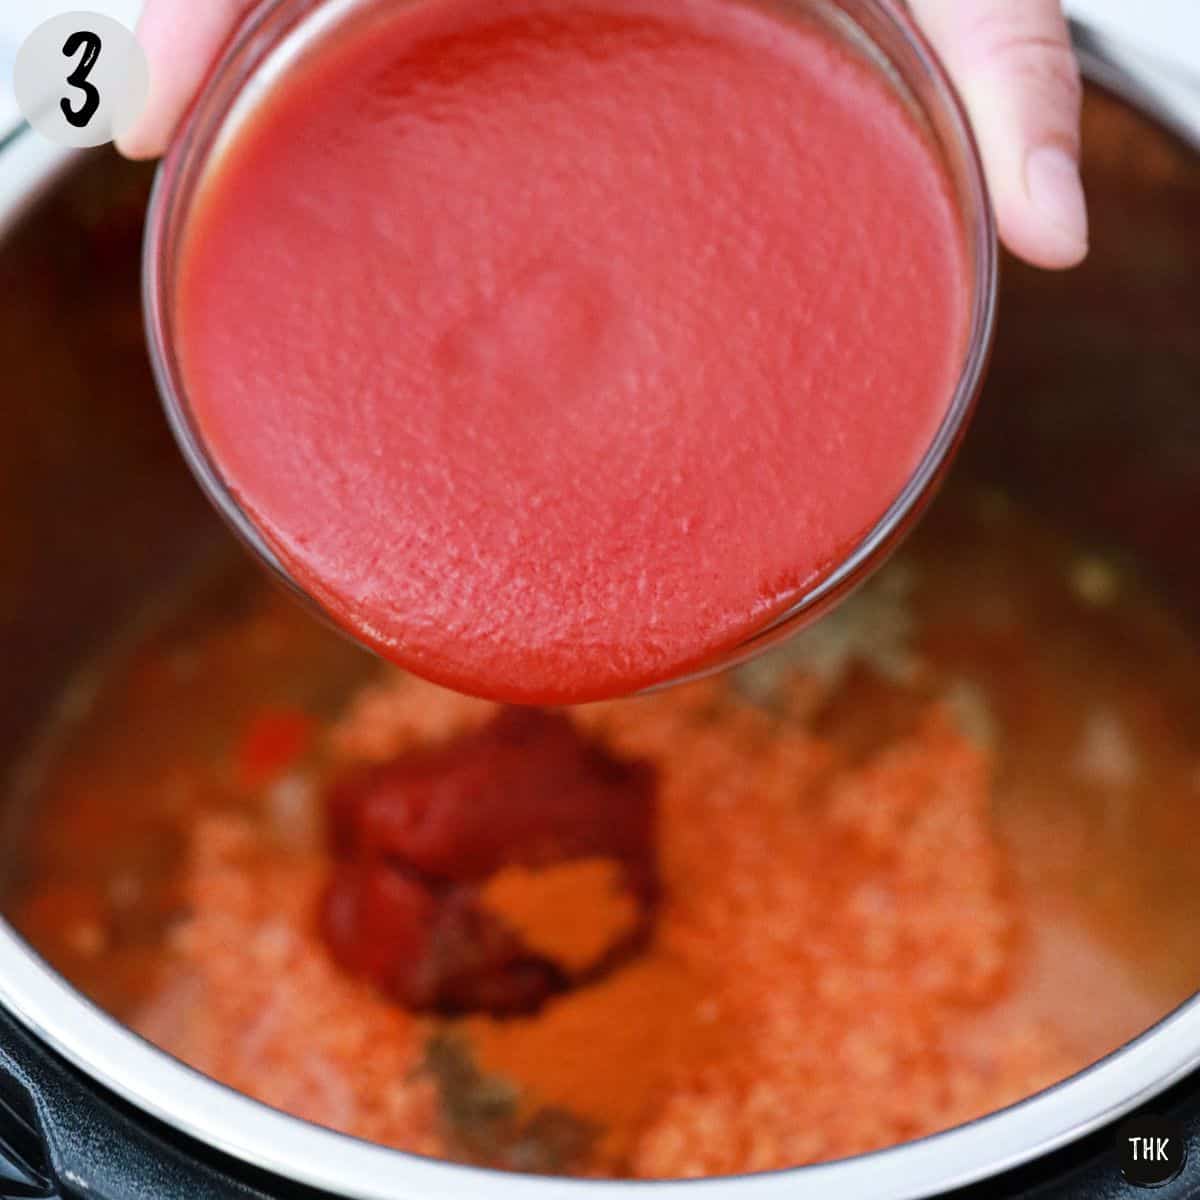 Tomato sauce being poured into pot.